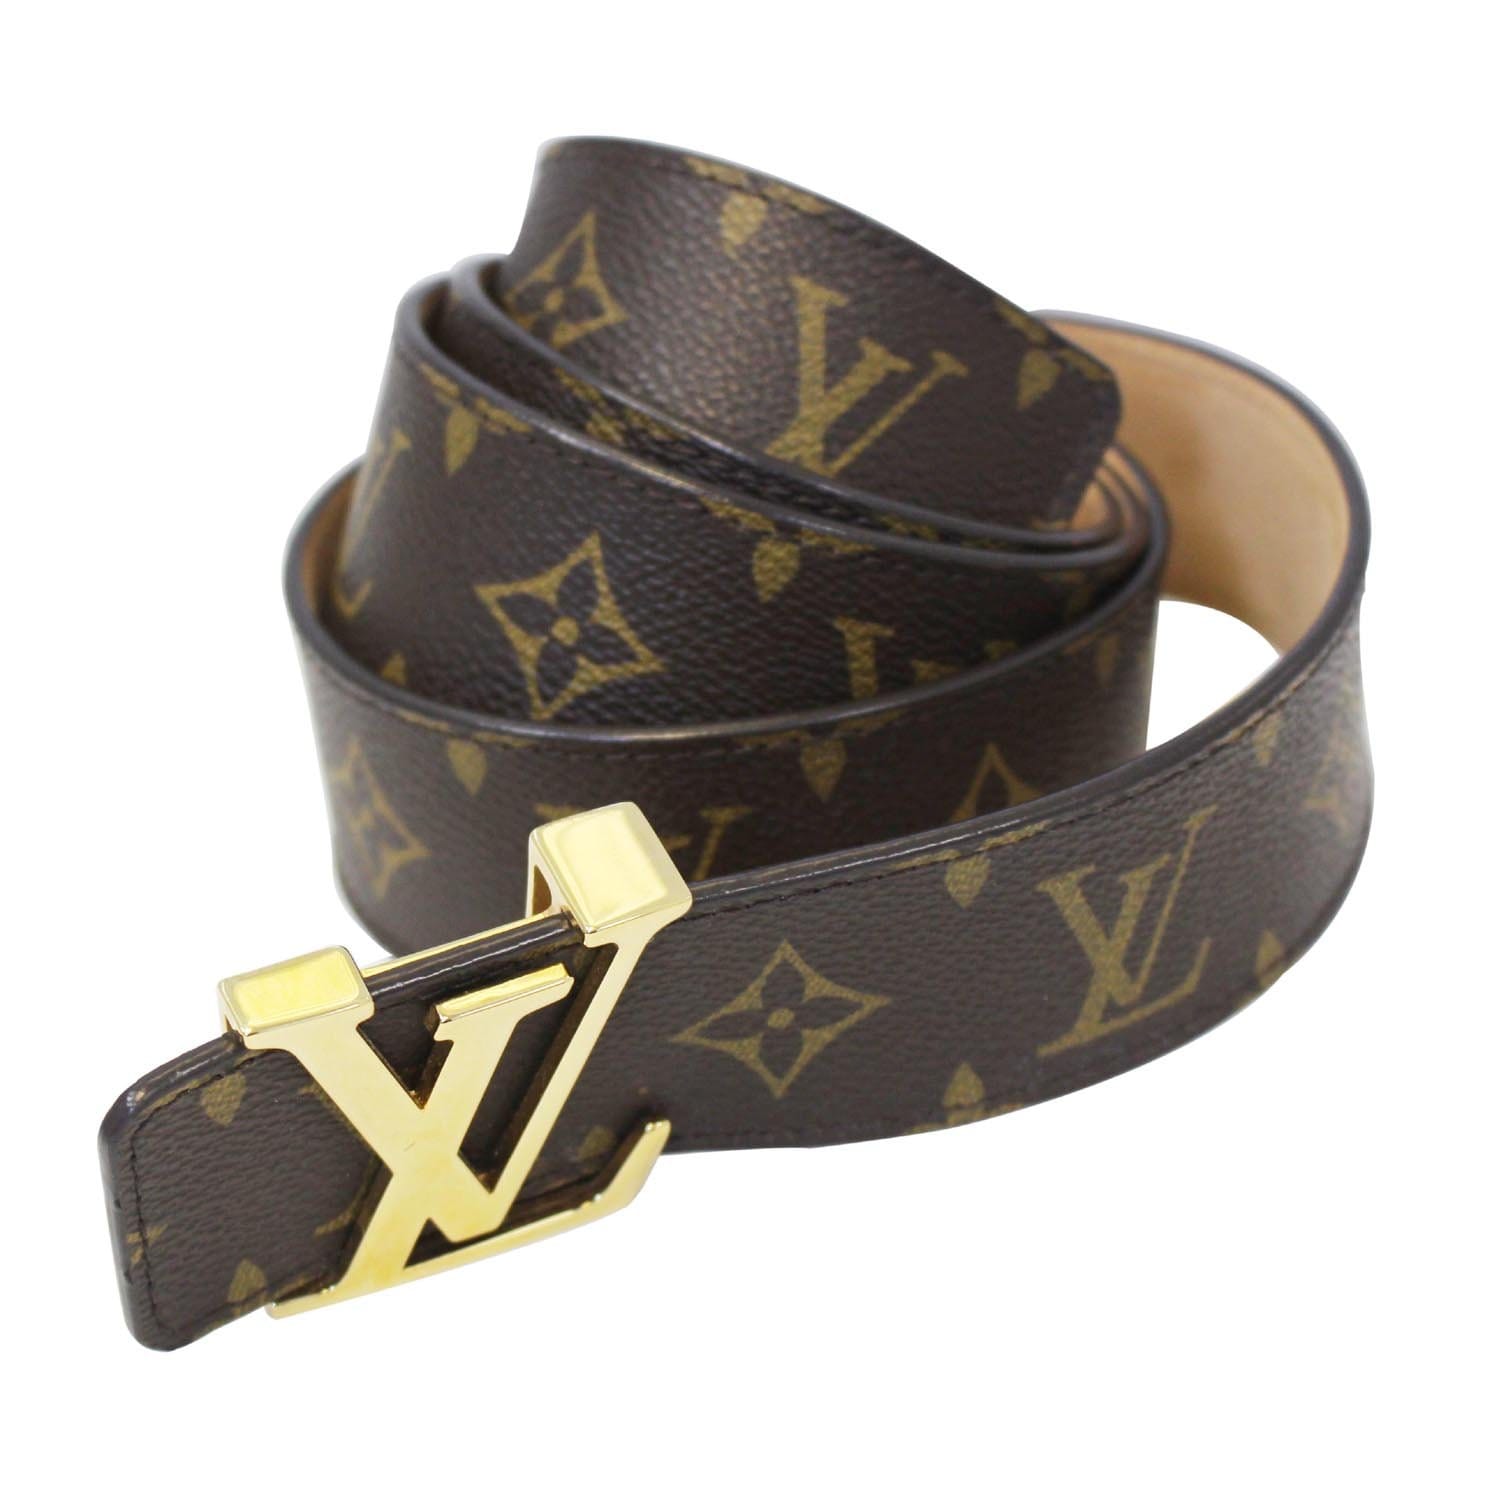 From 1-10 Rate this LOUIS VUITTON 30MM REVERSIBLE BELT 